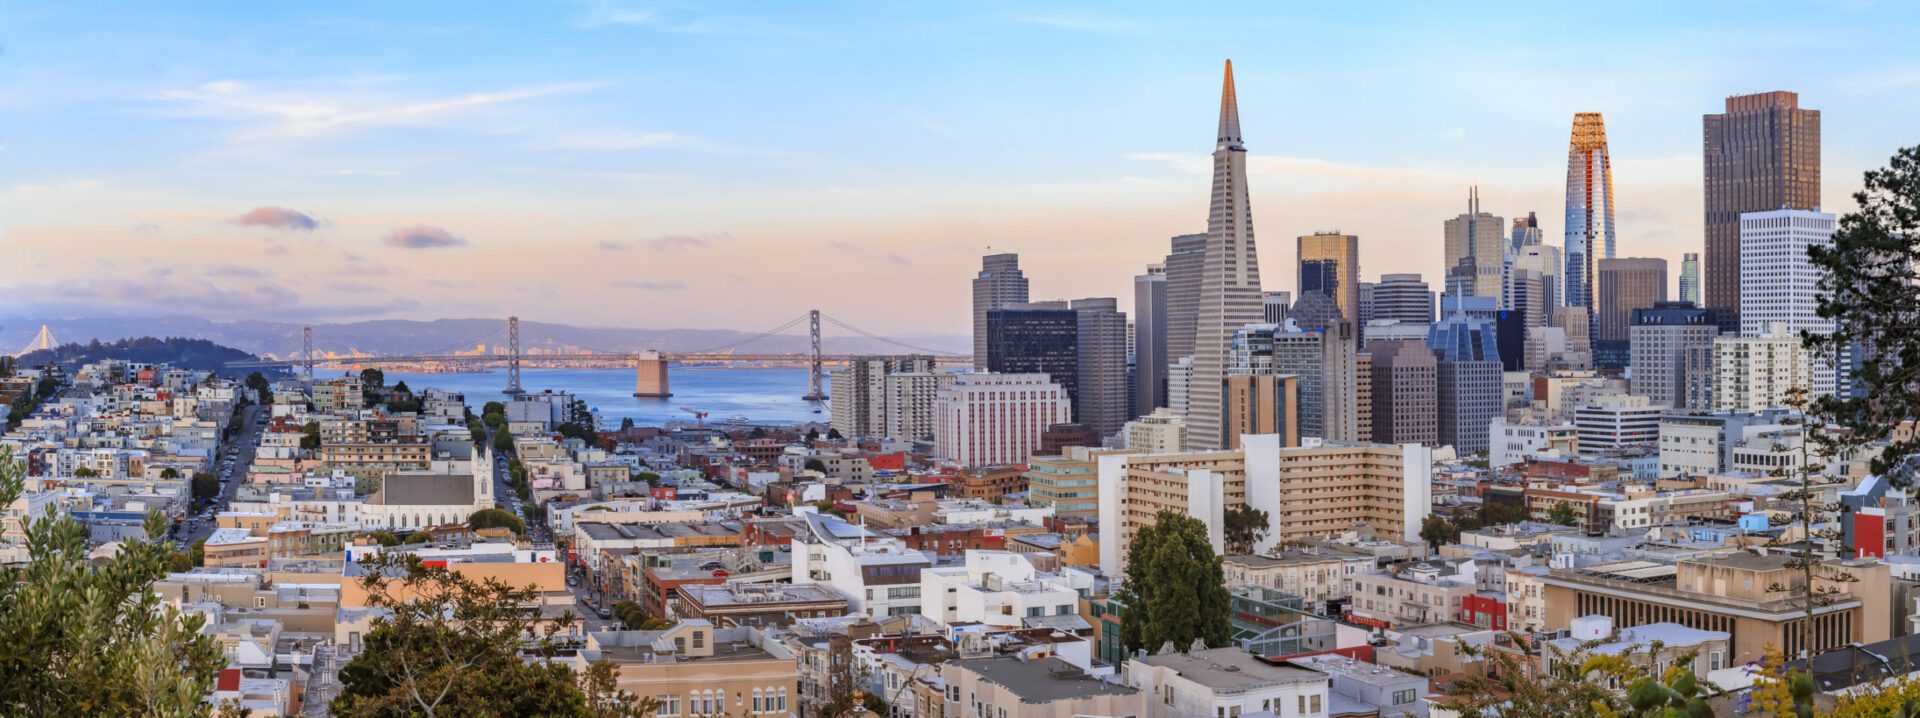 Built in SF: Remote Gained $300M, Clarify Health Raised $150M, and More SF Tech News